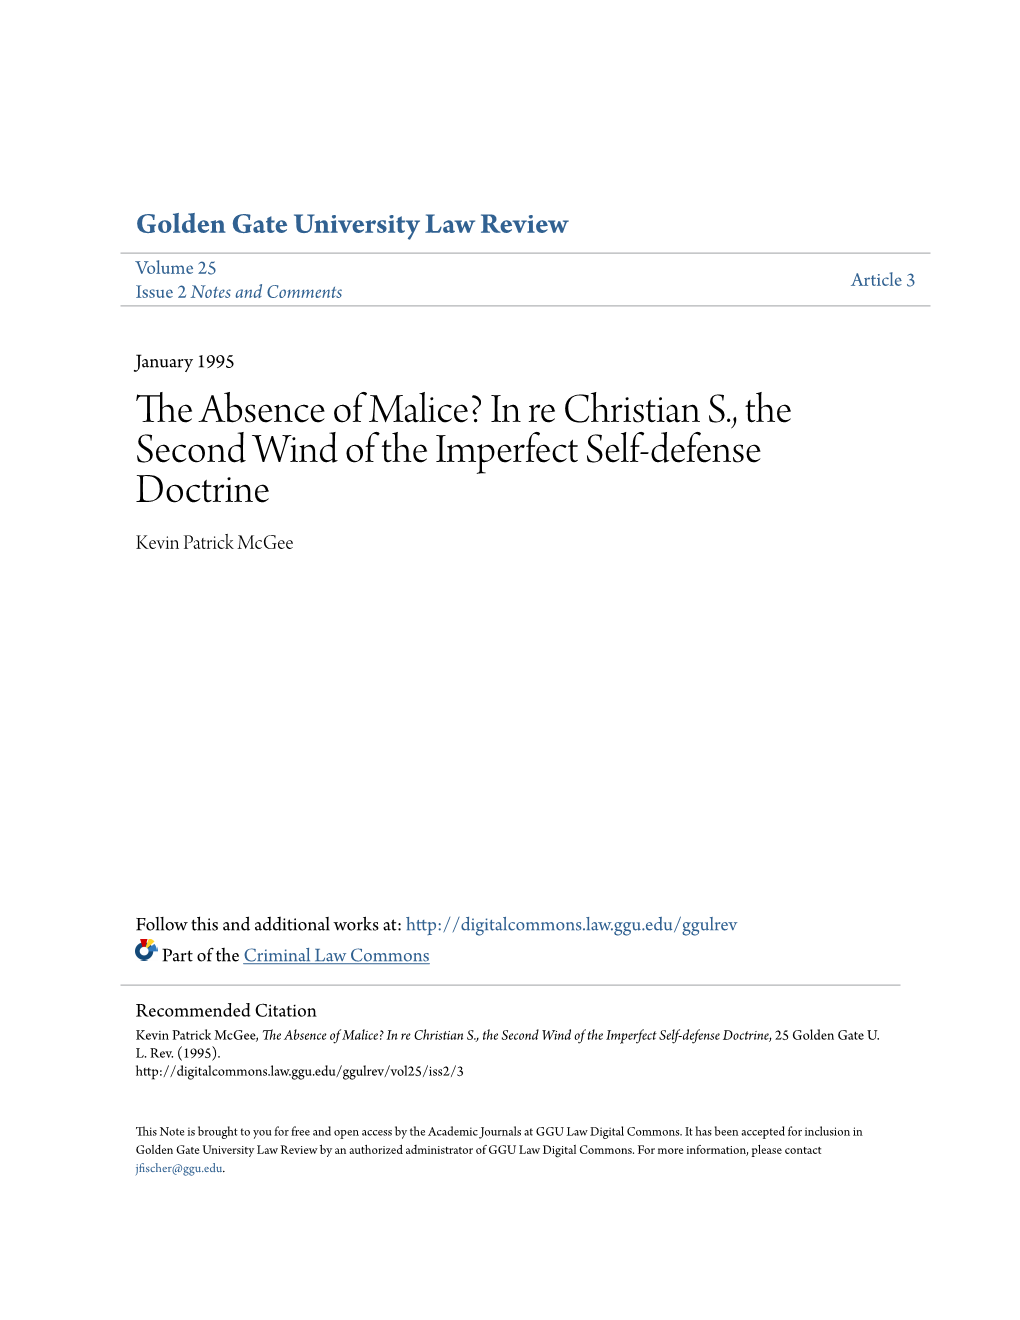 The Absence of Malice? in Re Christian S., the Second Wind of the Imperfect Self-Defense Doctrine Kevin Patrick Mcgee